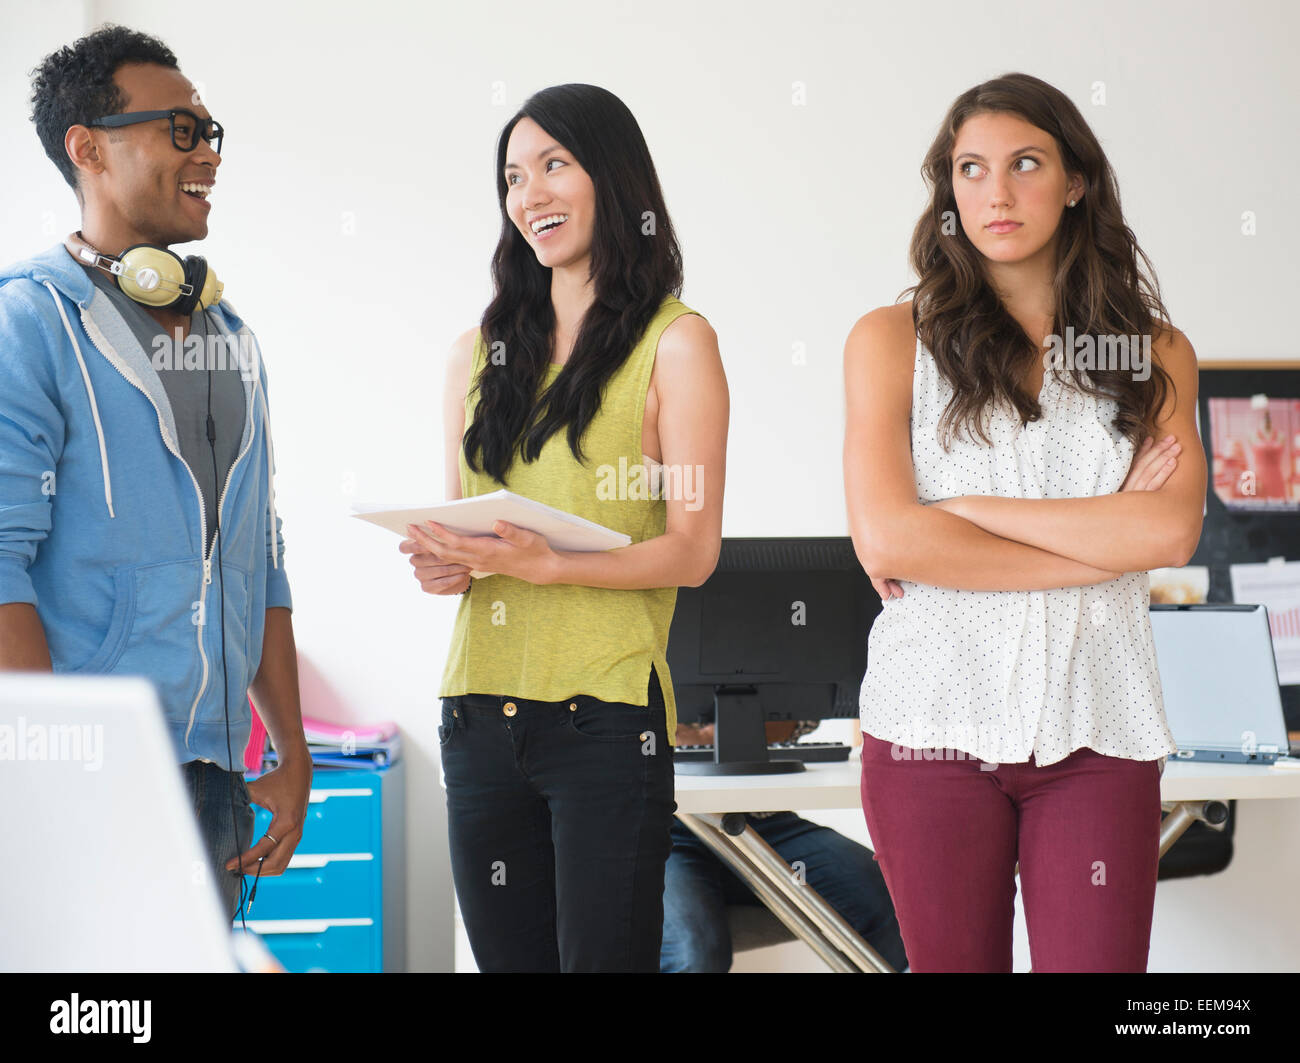 Annoyed businesswoman ignoring colleagues in office Stock Photo